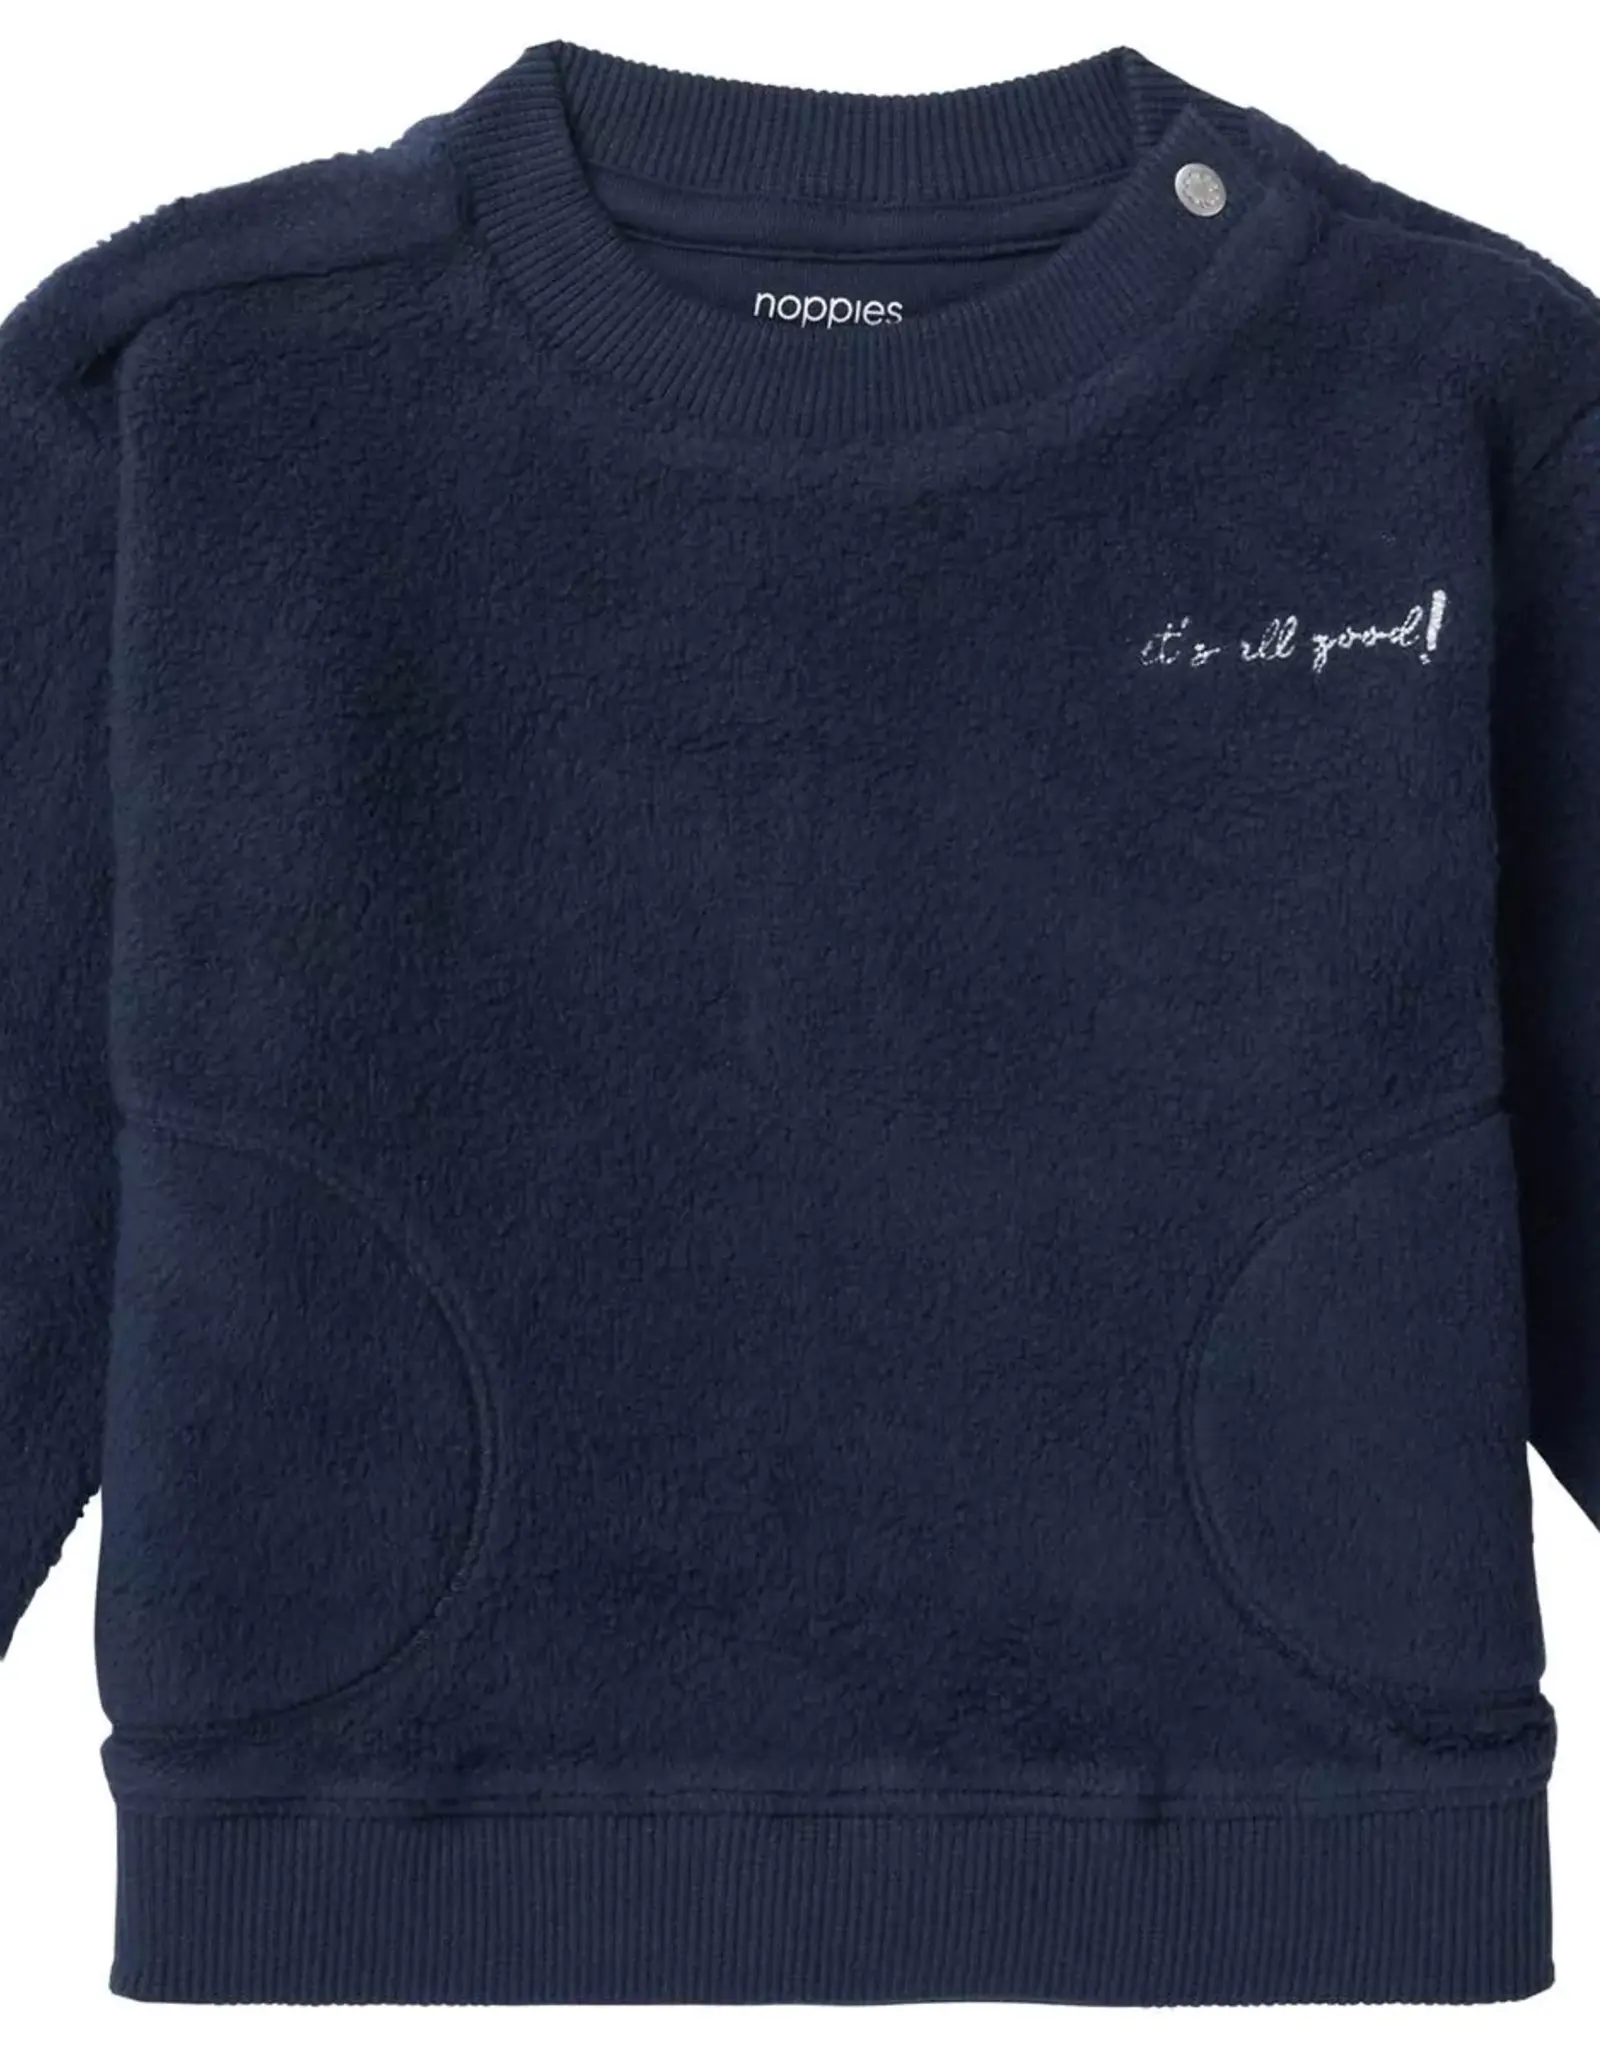 Noppies FA23 BbyB Troup Sweater